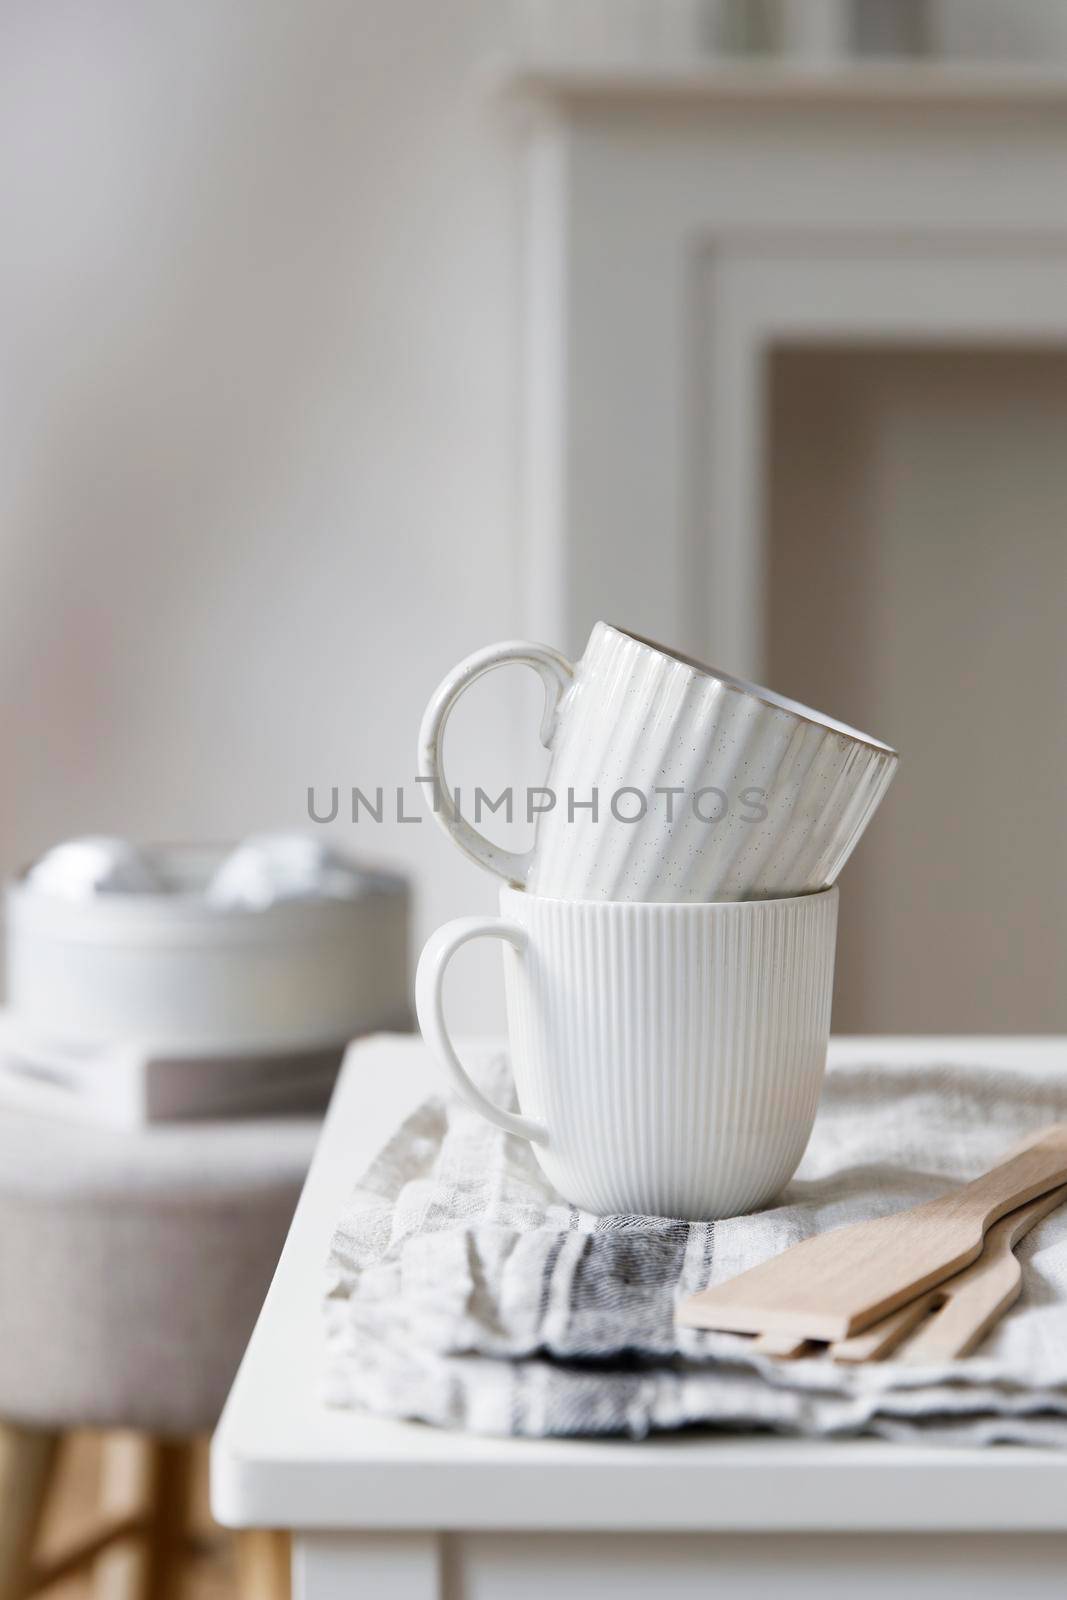 Two white mugs, a kitchen towel, a napkin and wooden frying utensils on the table. Defocus.